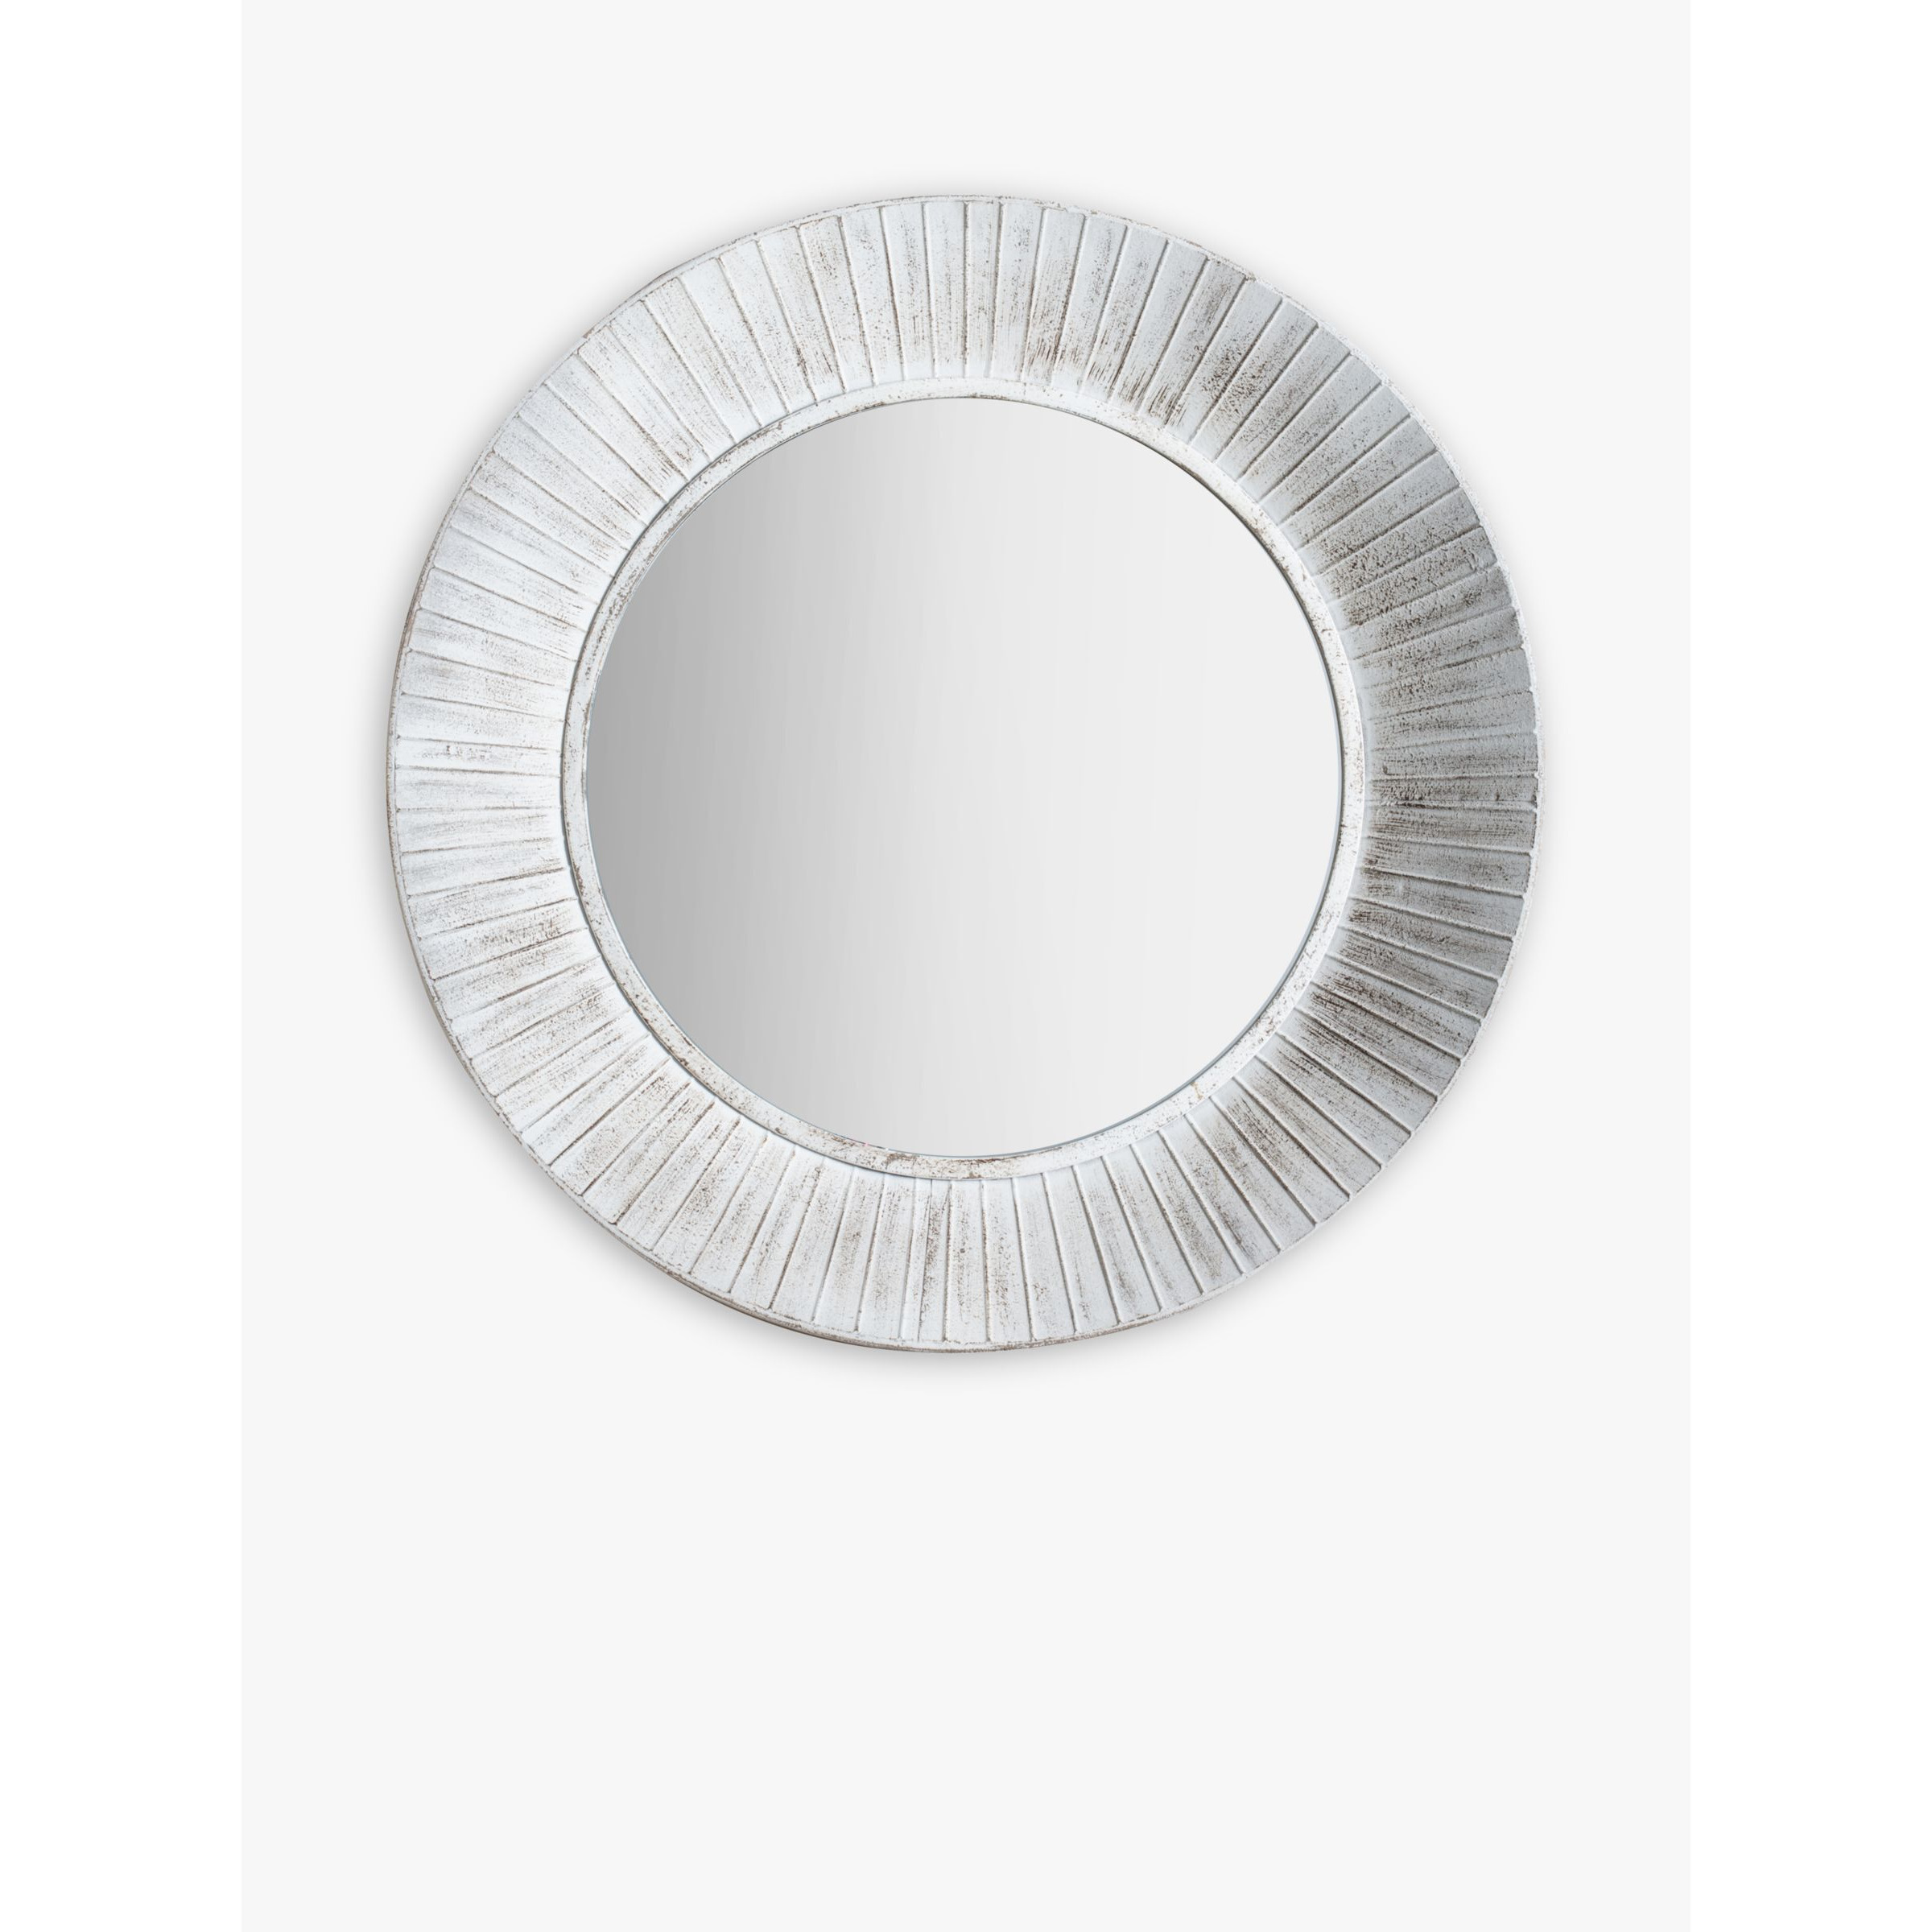 Gallery Direct Round Distressed Metal Wall Mirror, 81cm, White - image 1